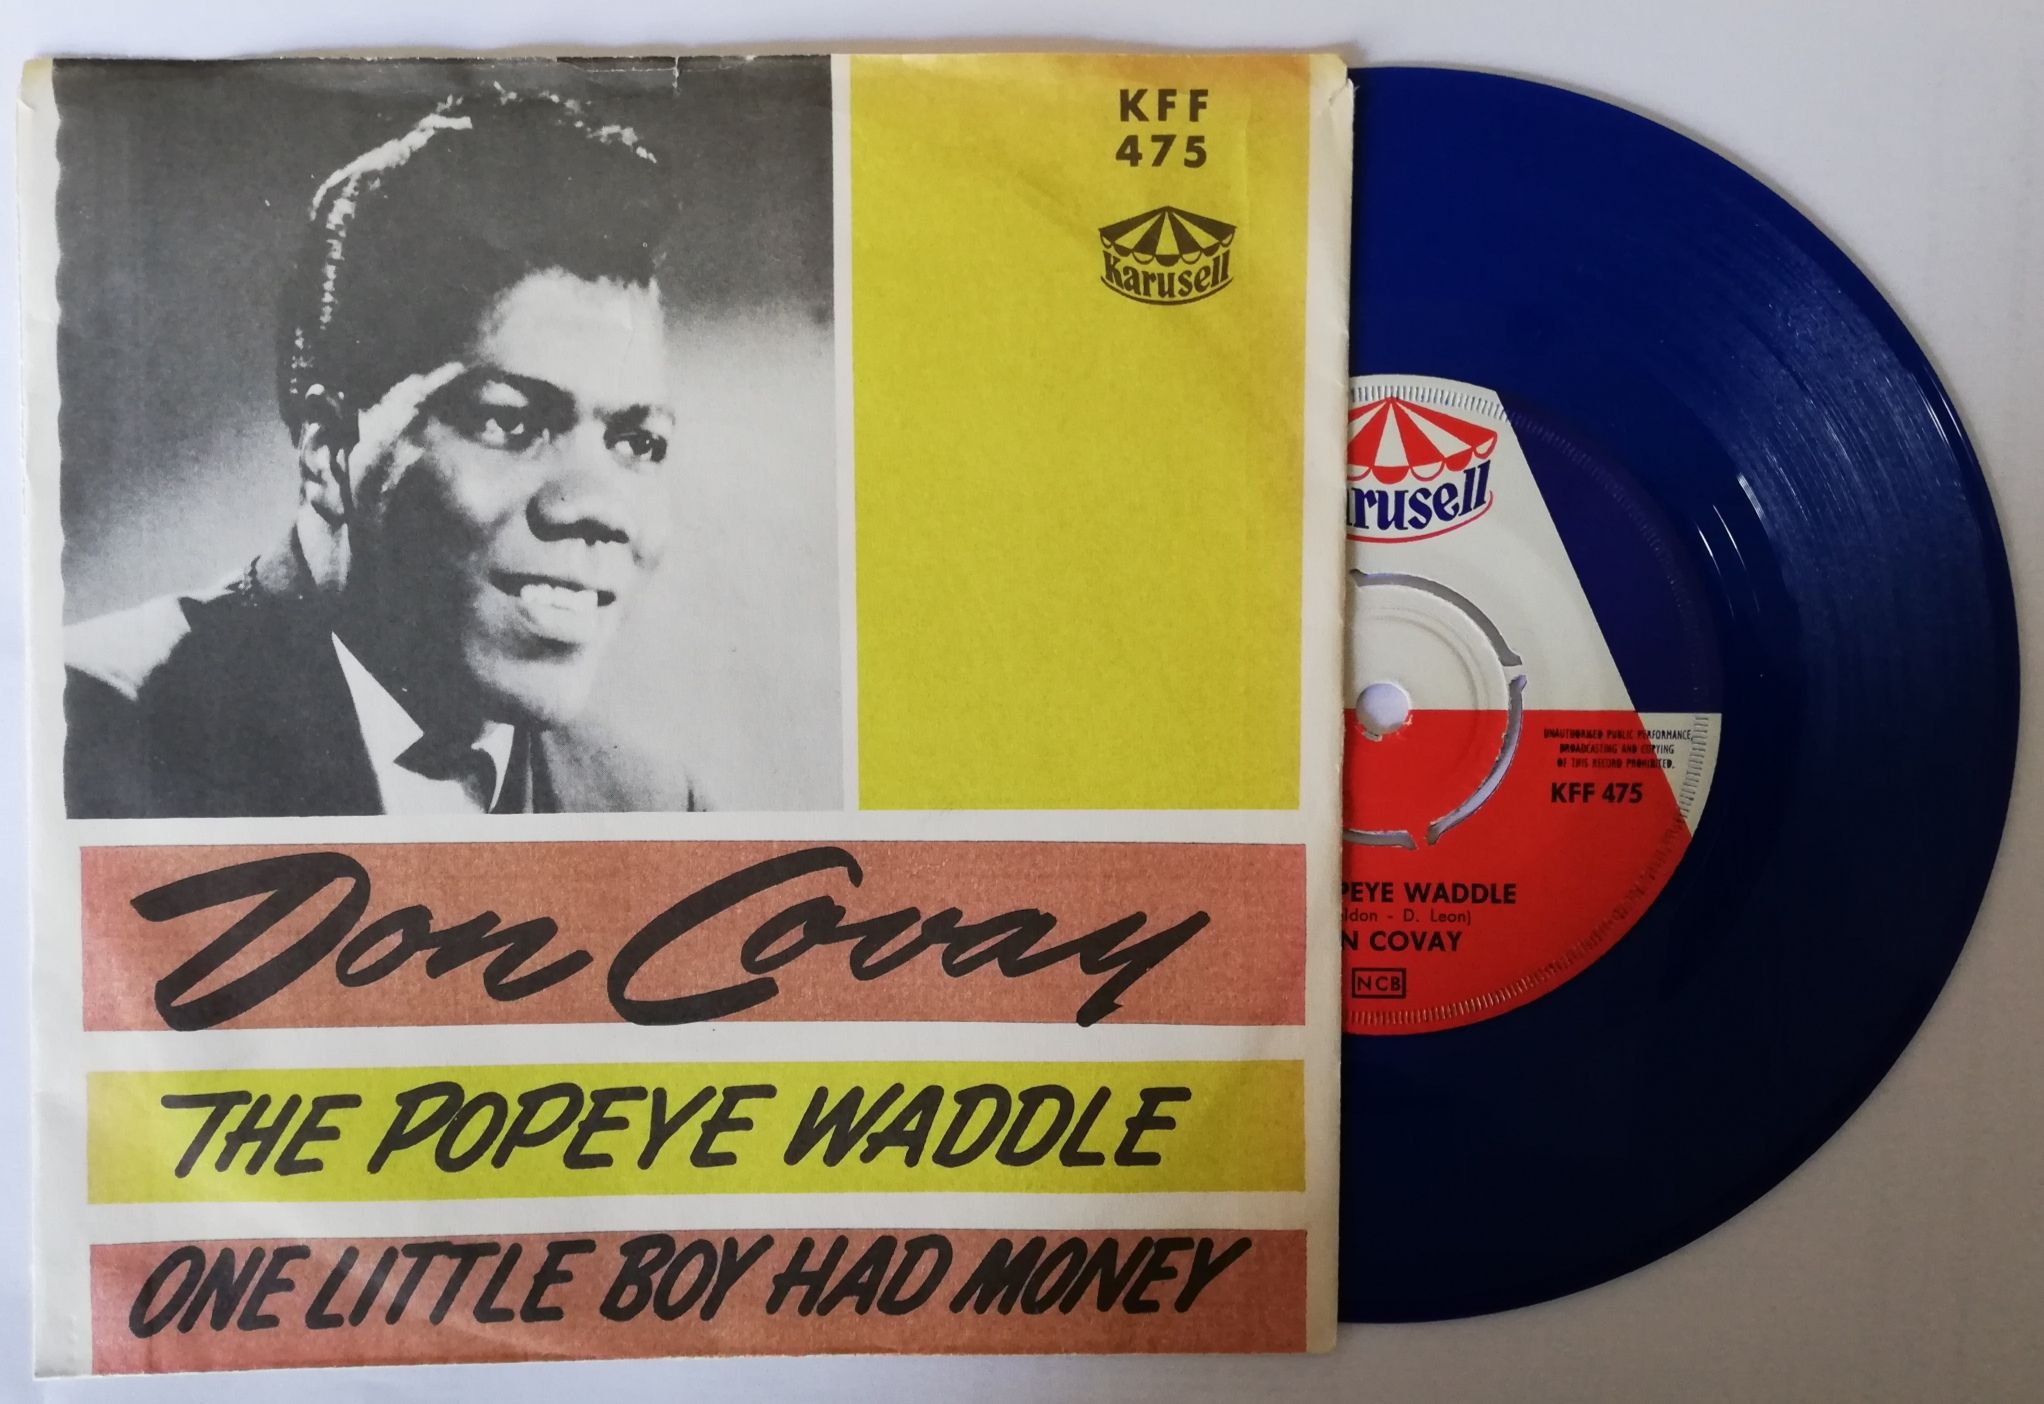 Don Covay - The Popeye Waddle - Karusell KFF 475 Sweden 7" PS